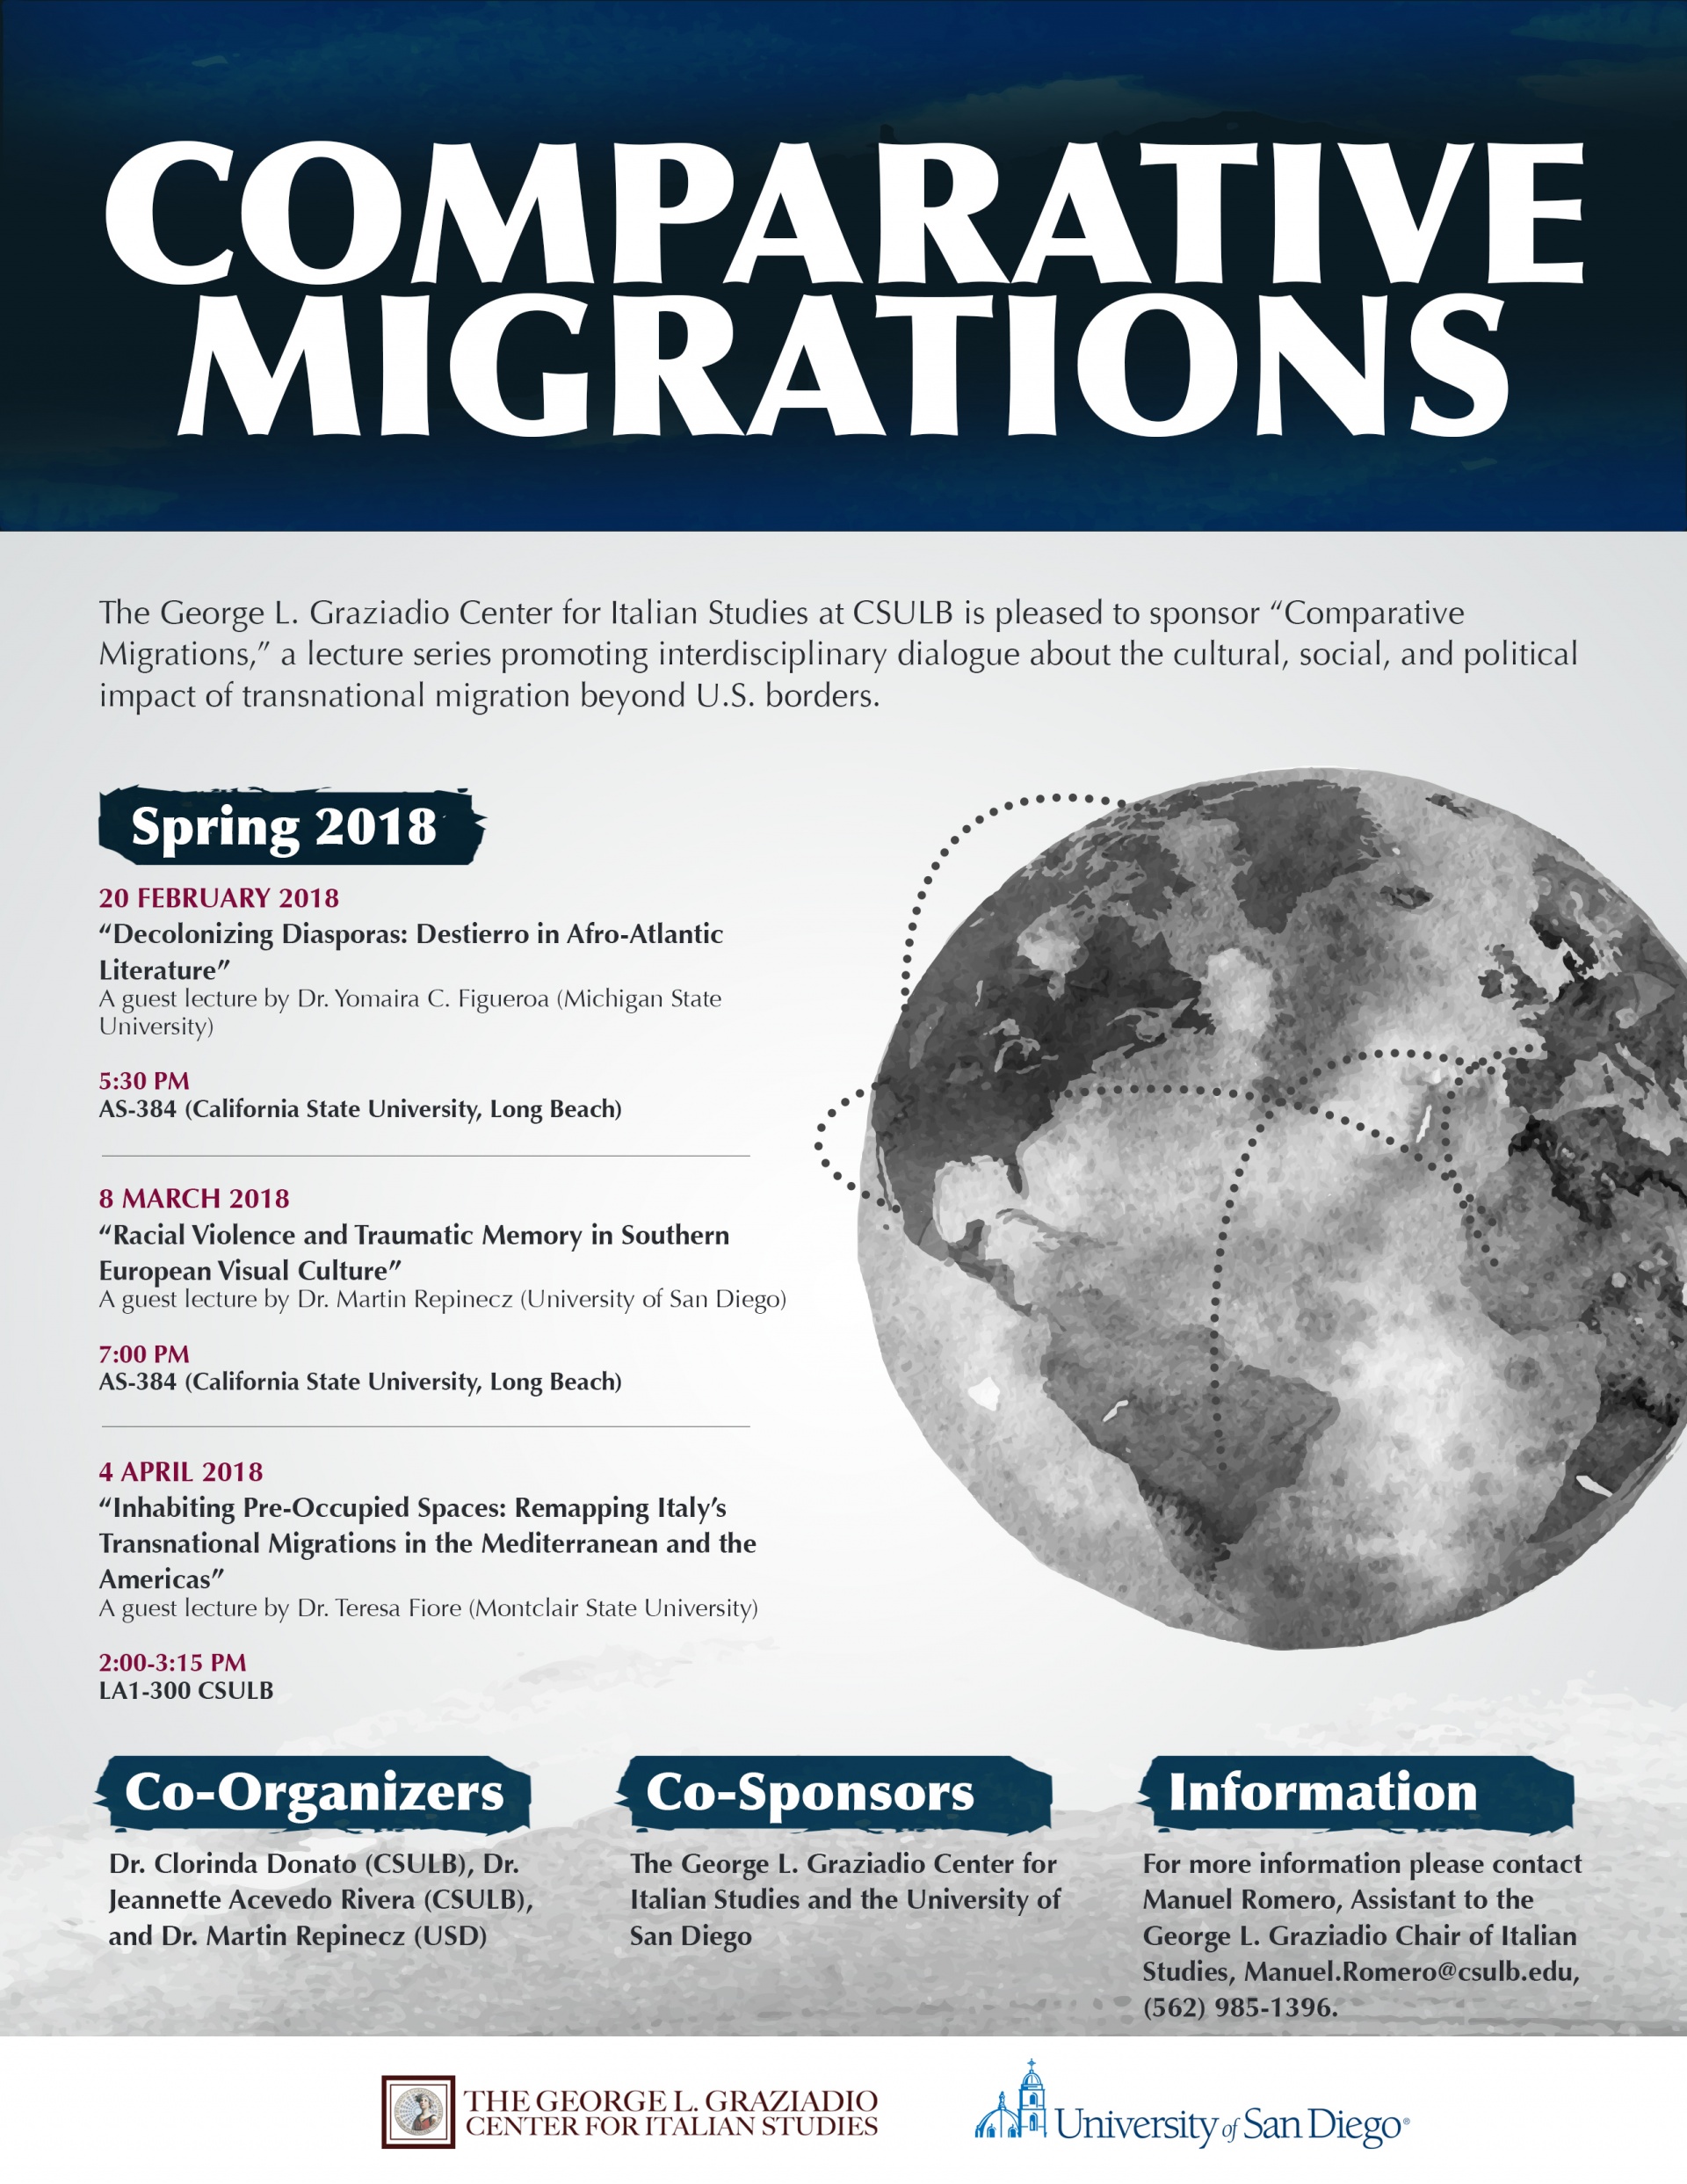 Flyer for Comparative Migrations Lecture Series